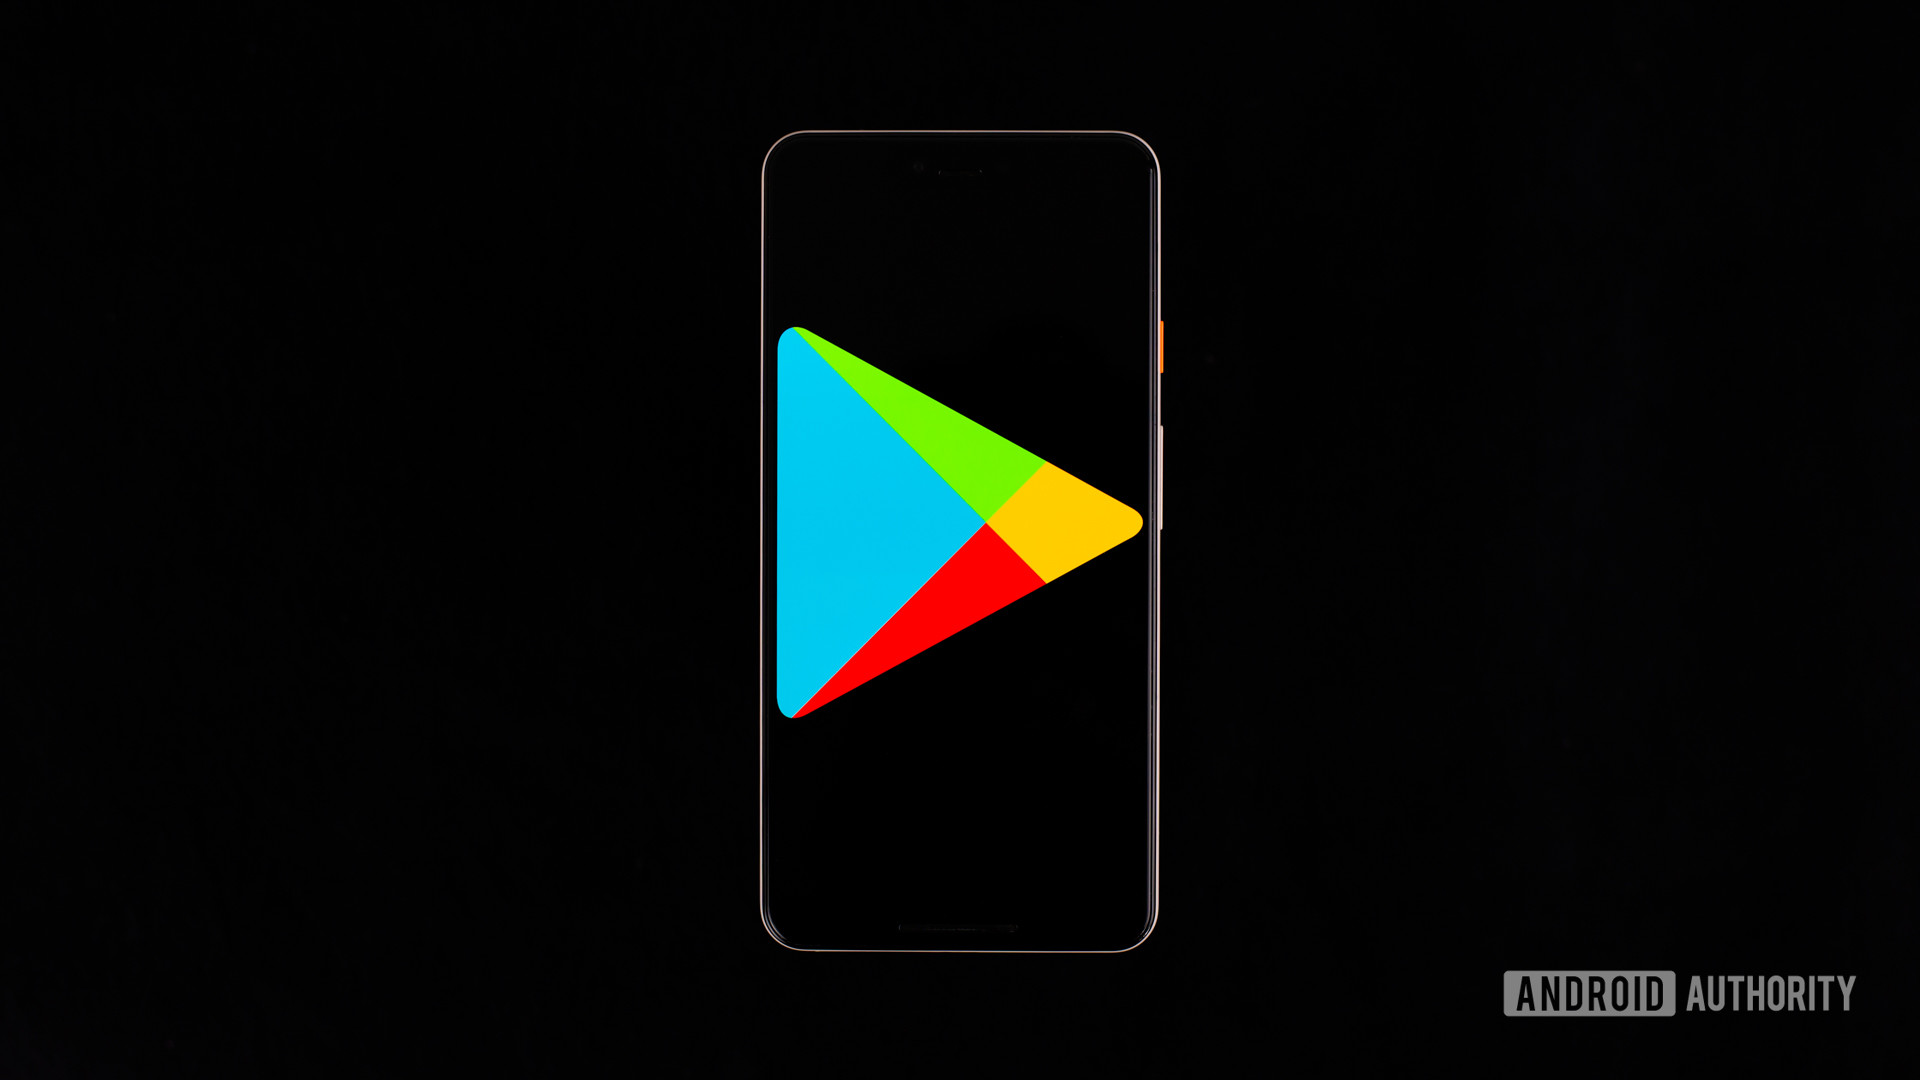 Google Play Store on smartphone - How to take screenshots on Android